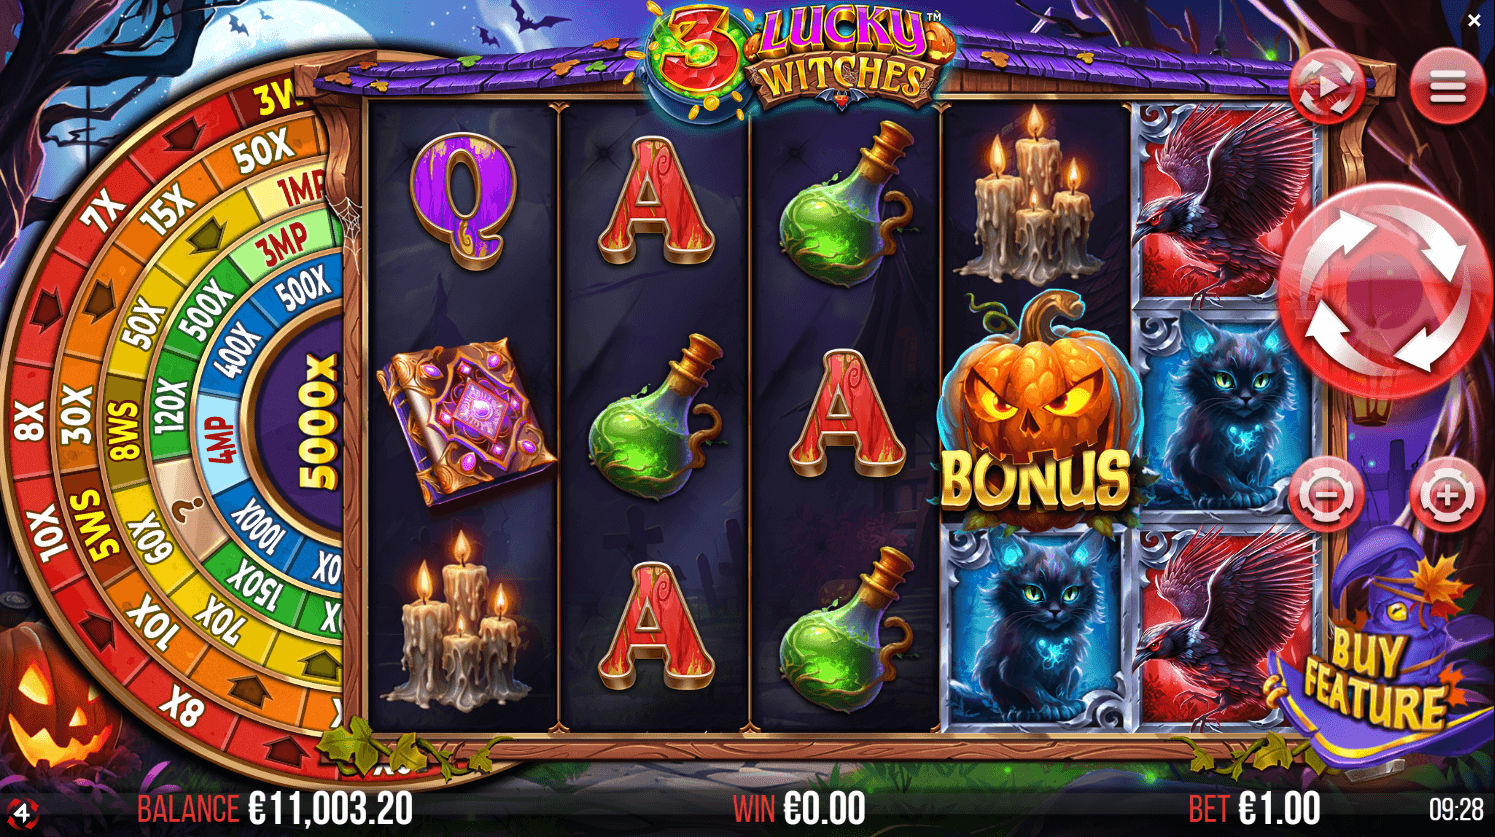 3 Lucky Wishes Slot Game